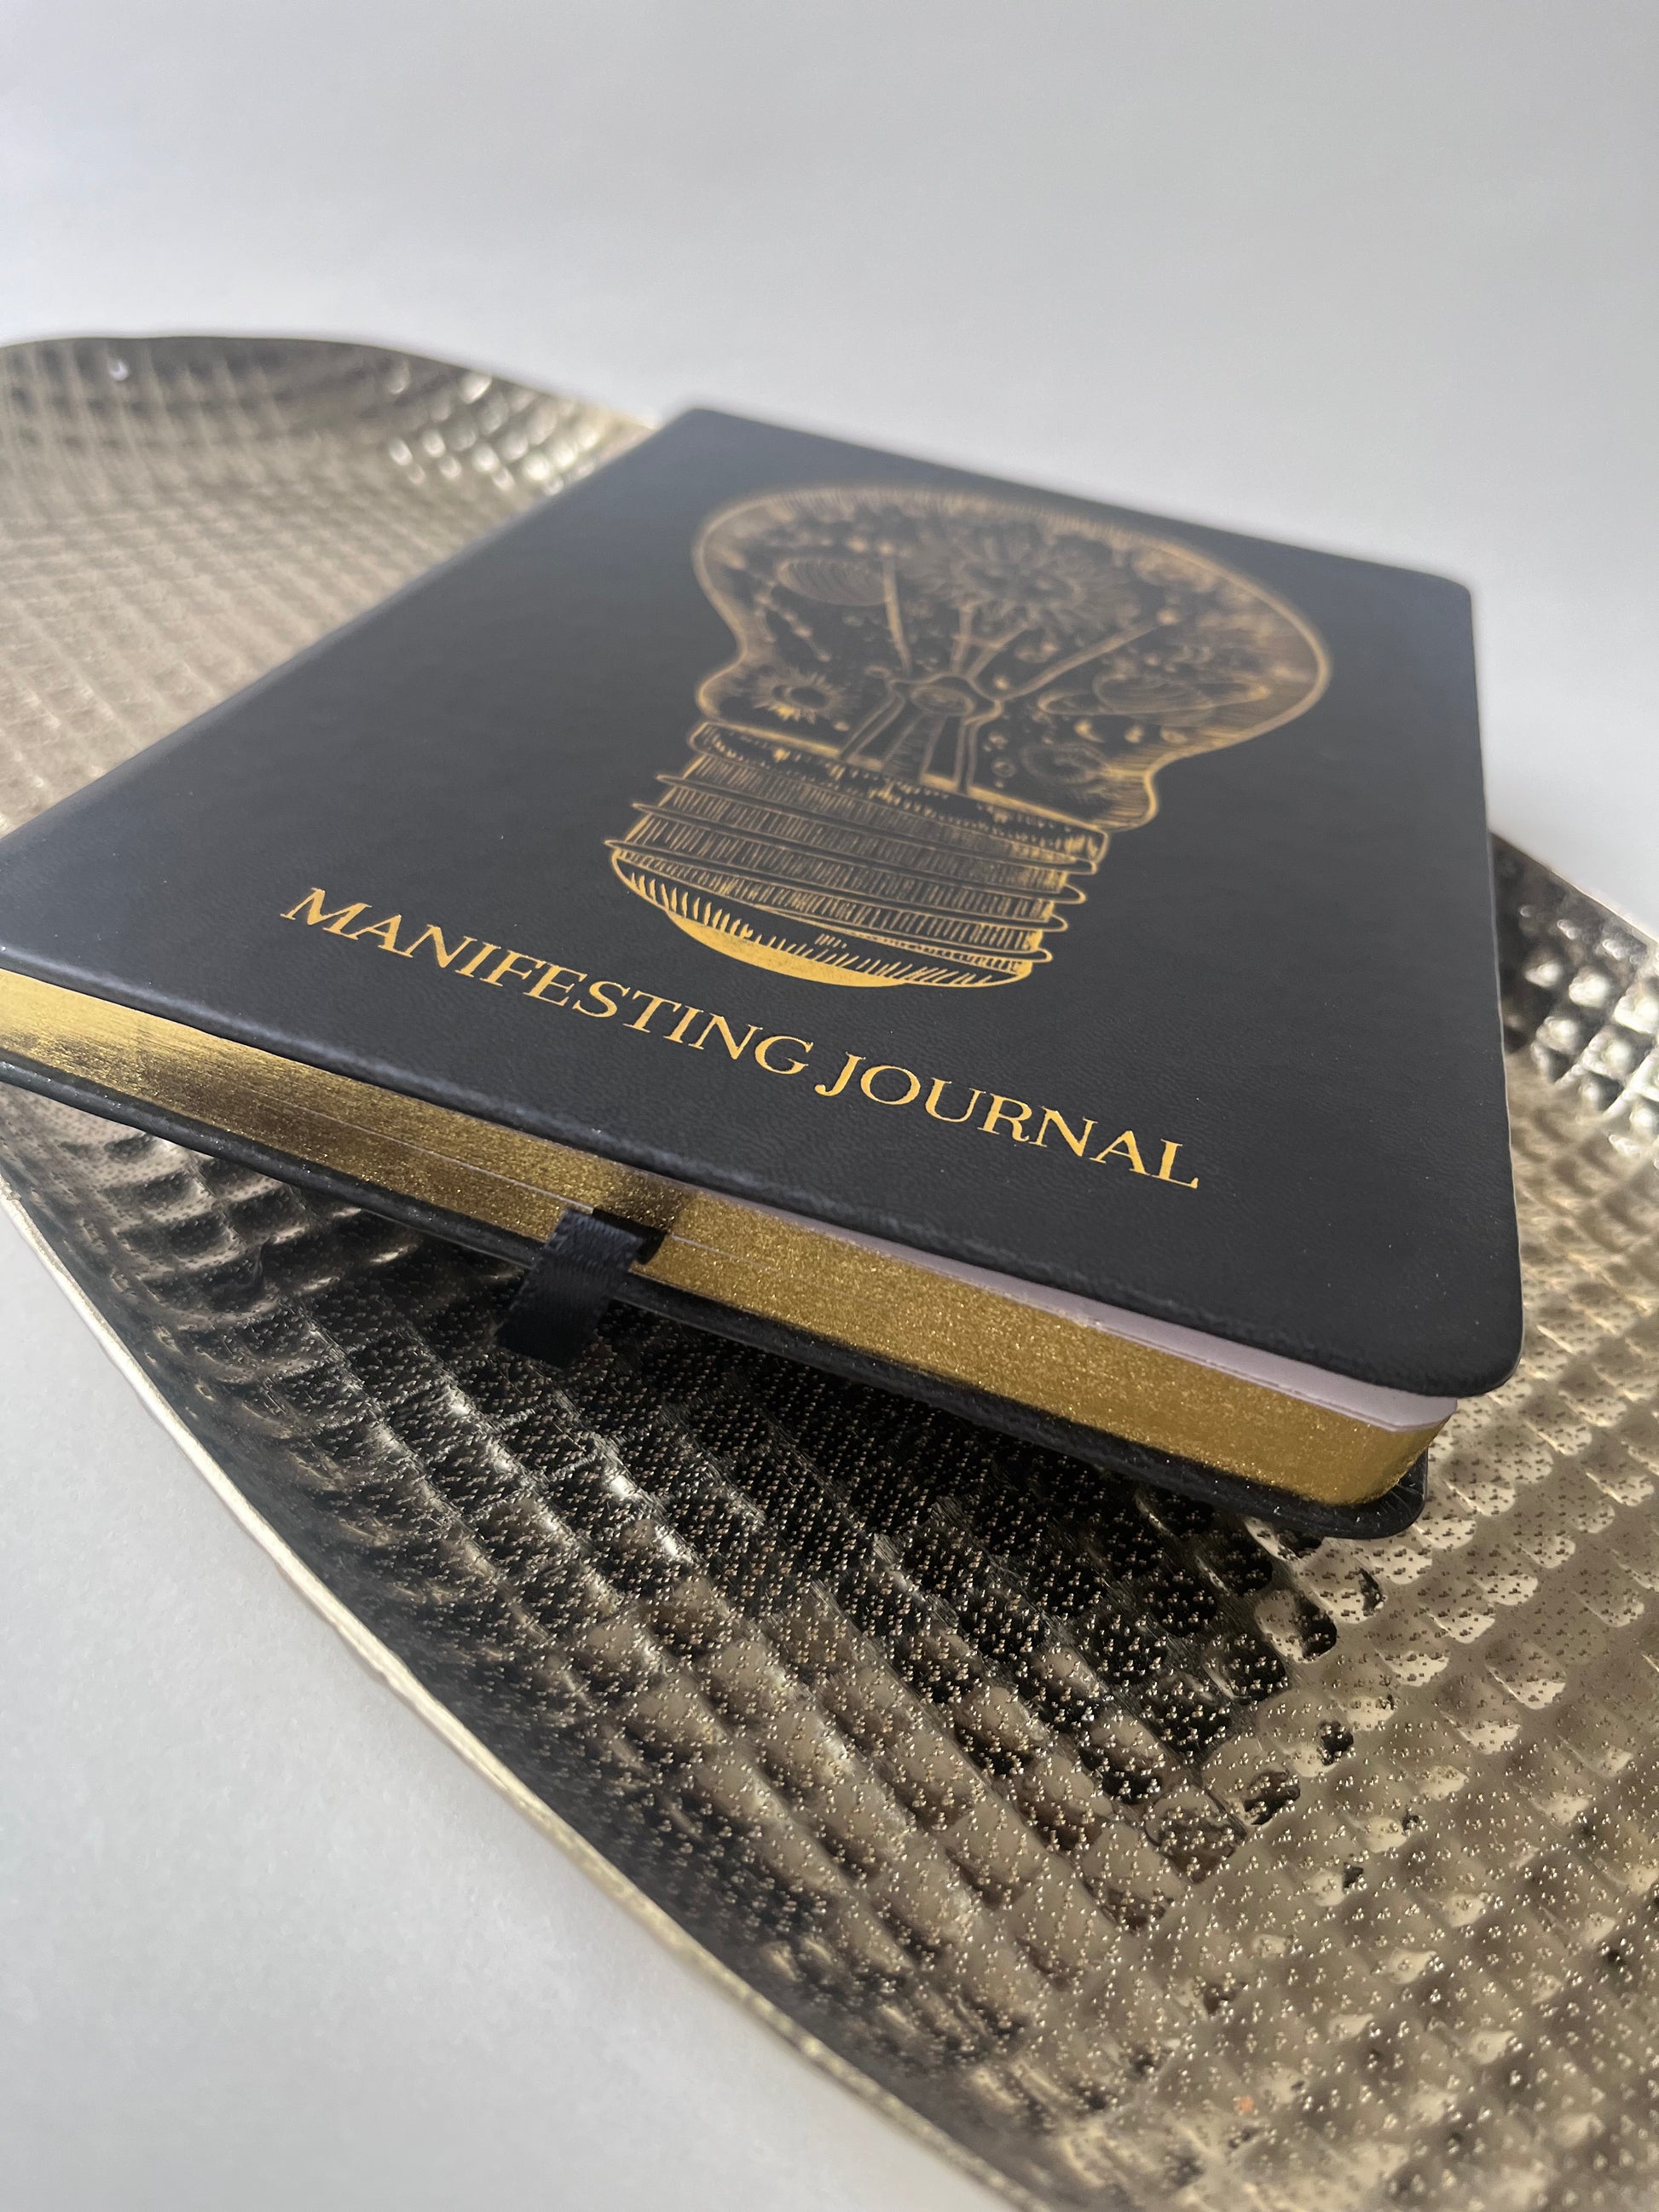 Leather Hardcover Manifesting Journal with image of lightbulb in gold foiling 